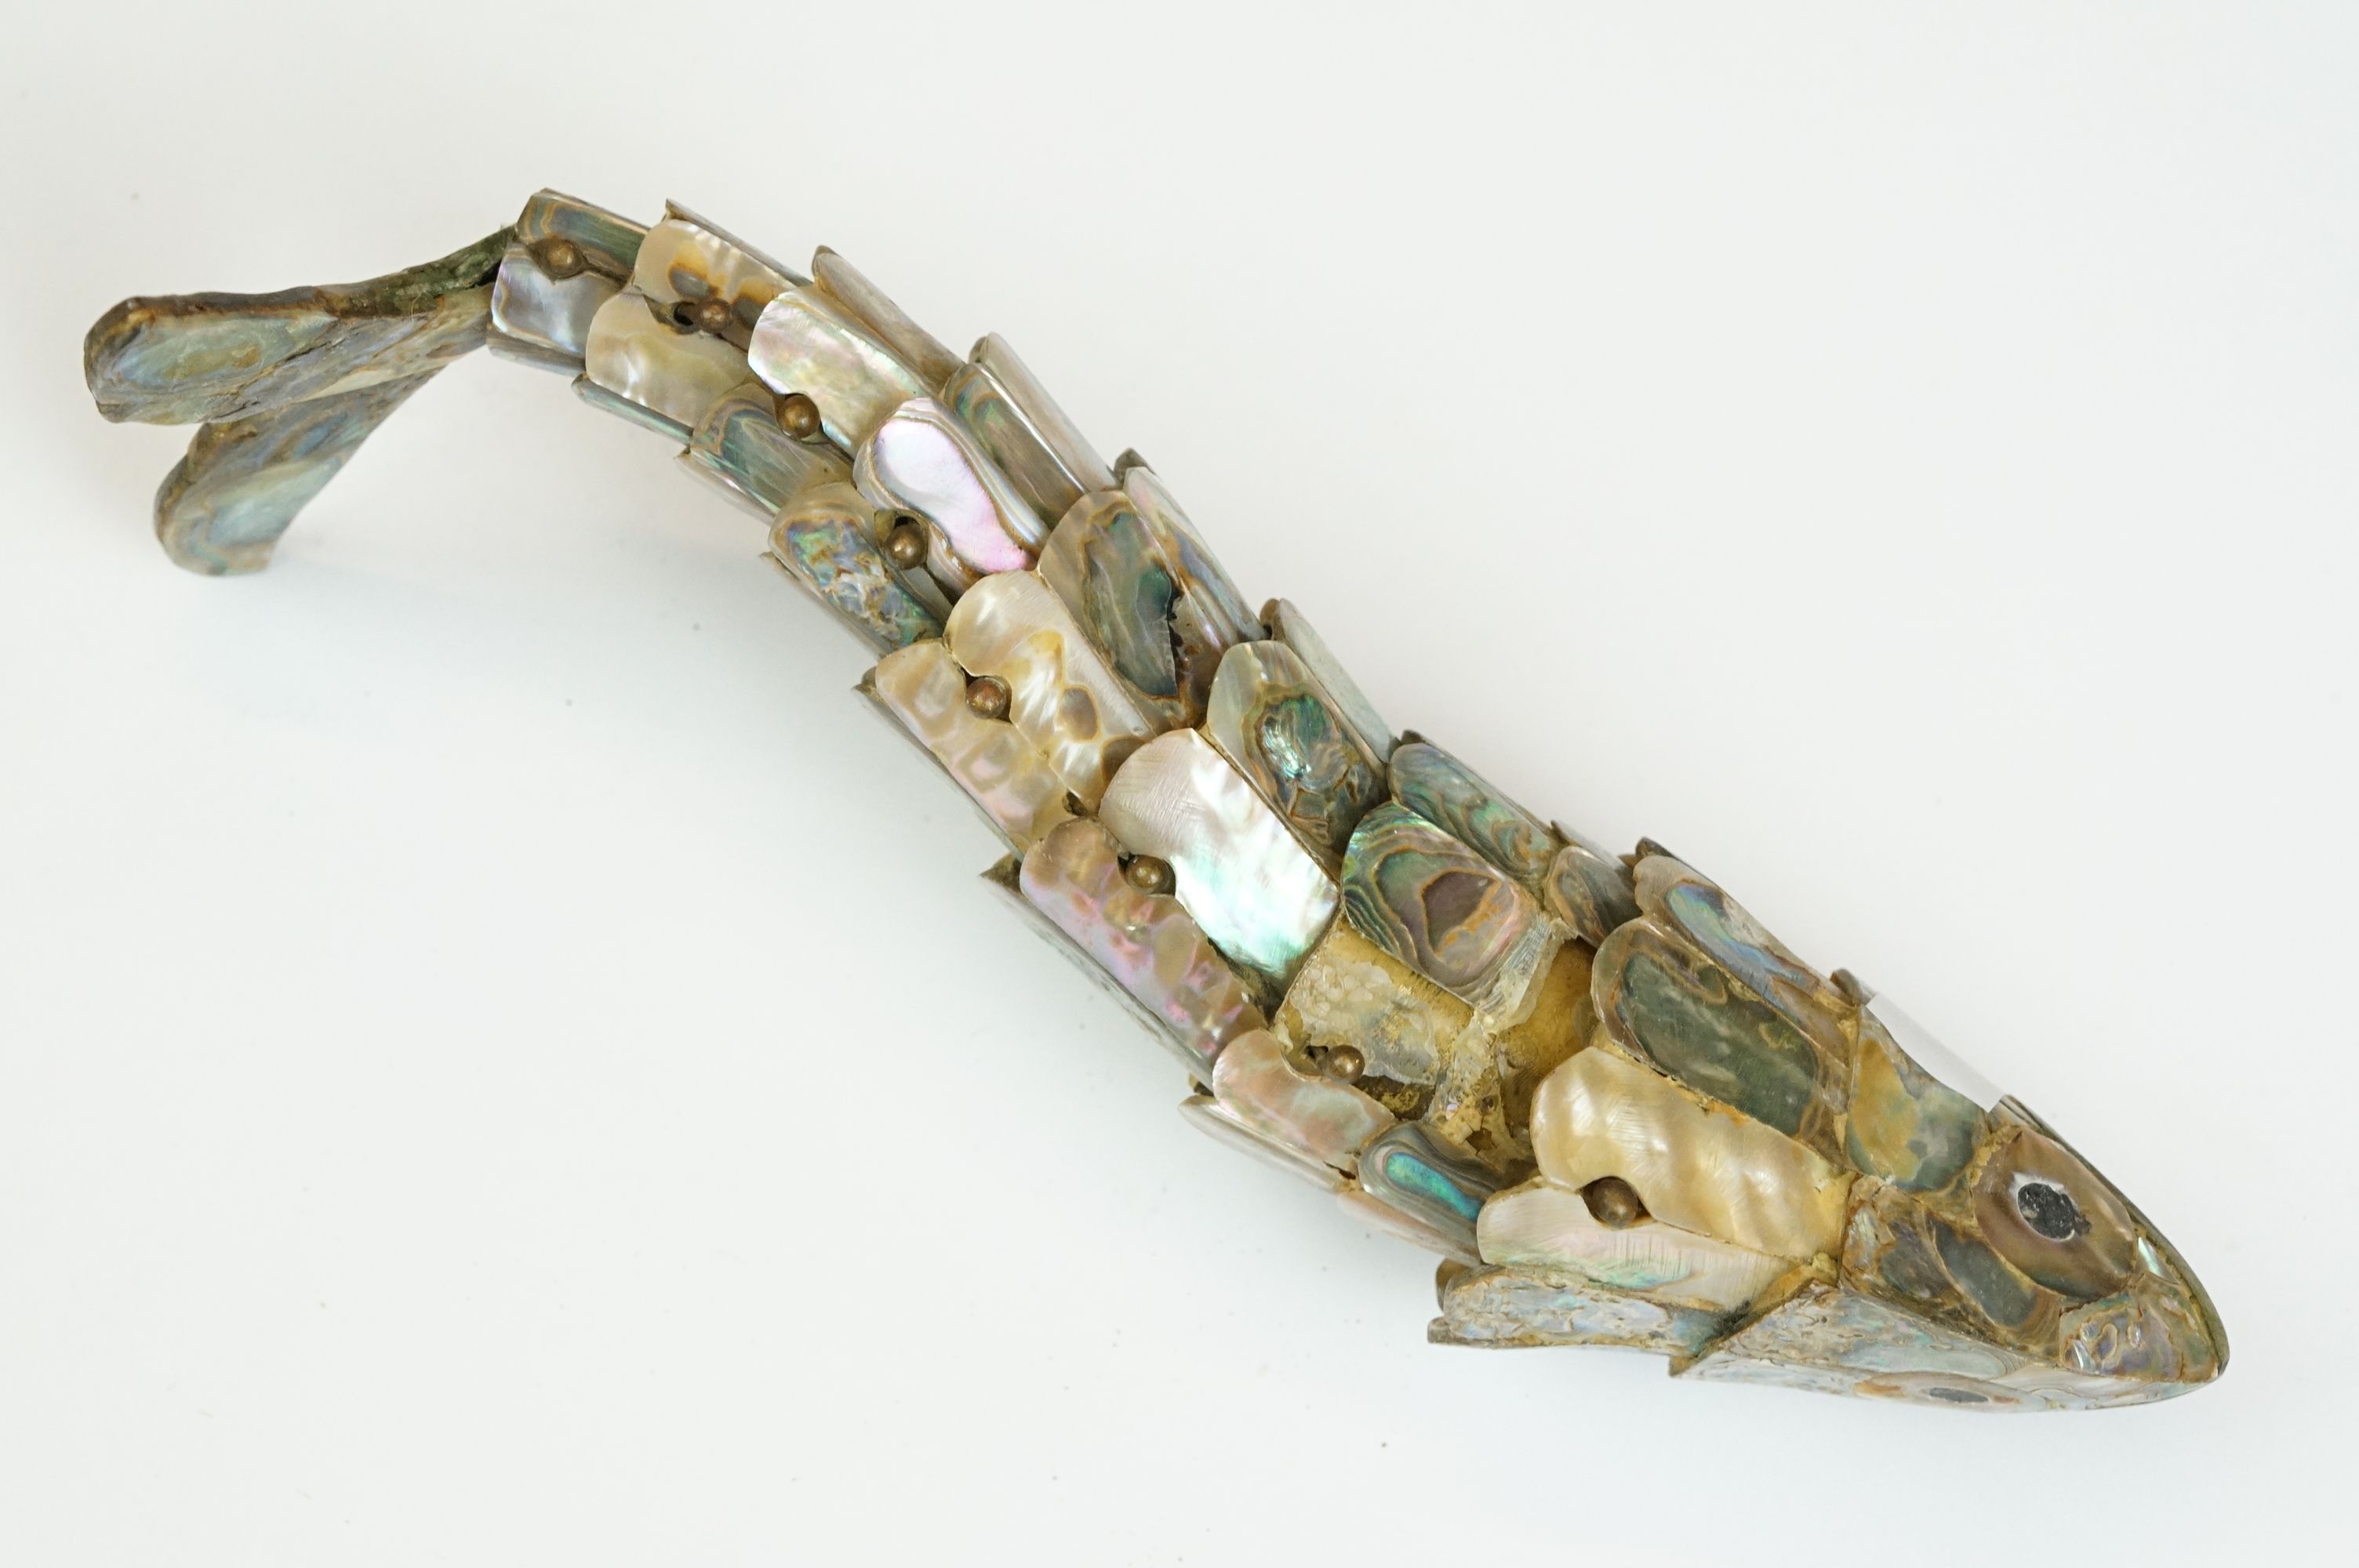 A Large Abalone Articulated Fish Bottle Opener, approx 19cm in length. - Image 3 of 6